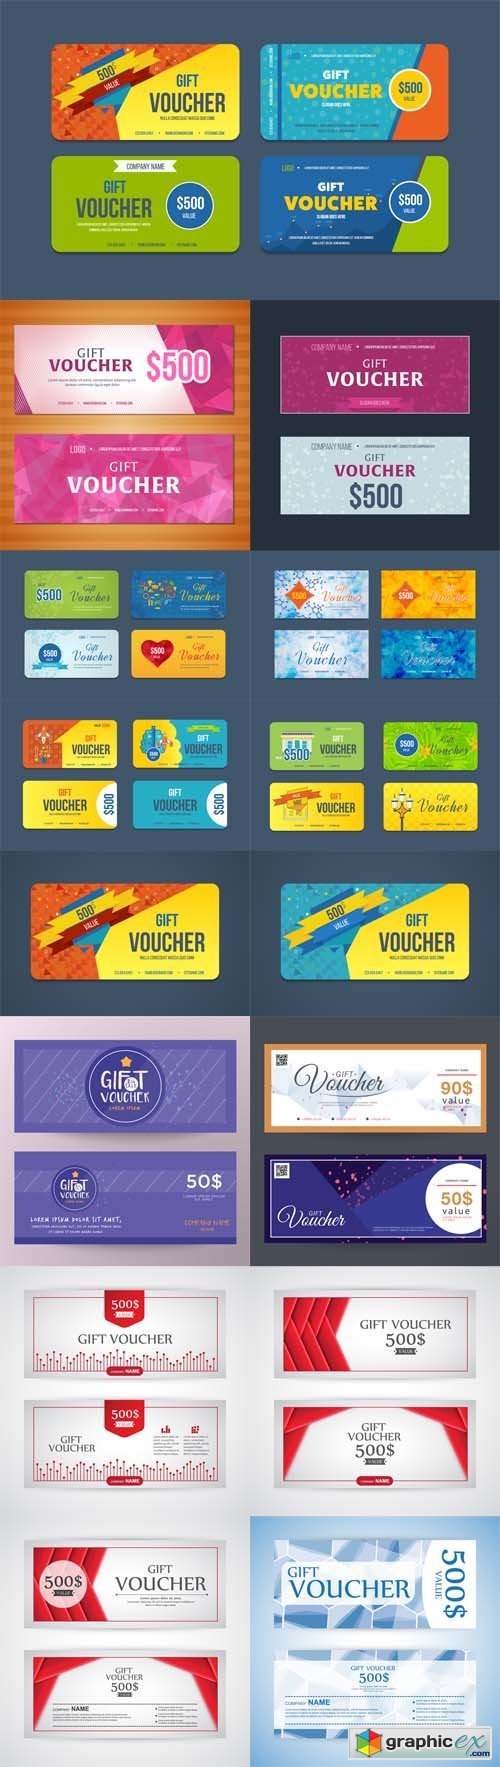 Gift Voucher Illustrations. Card Templates 2